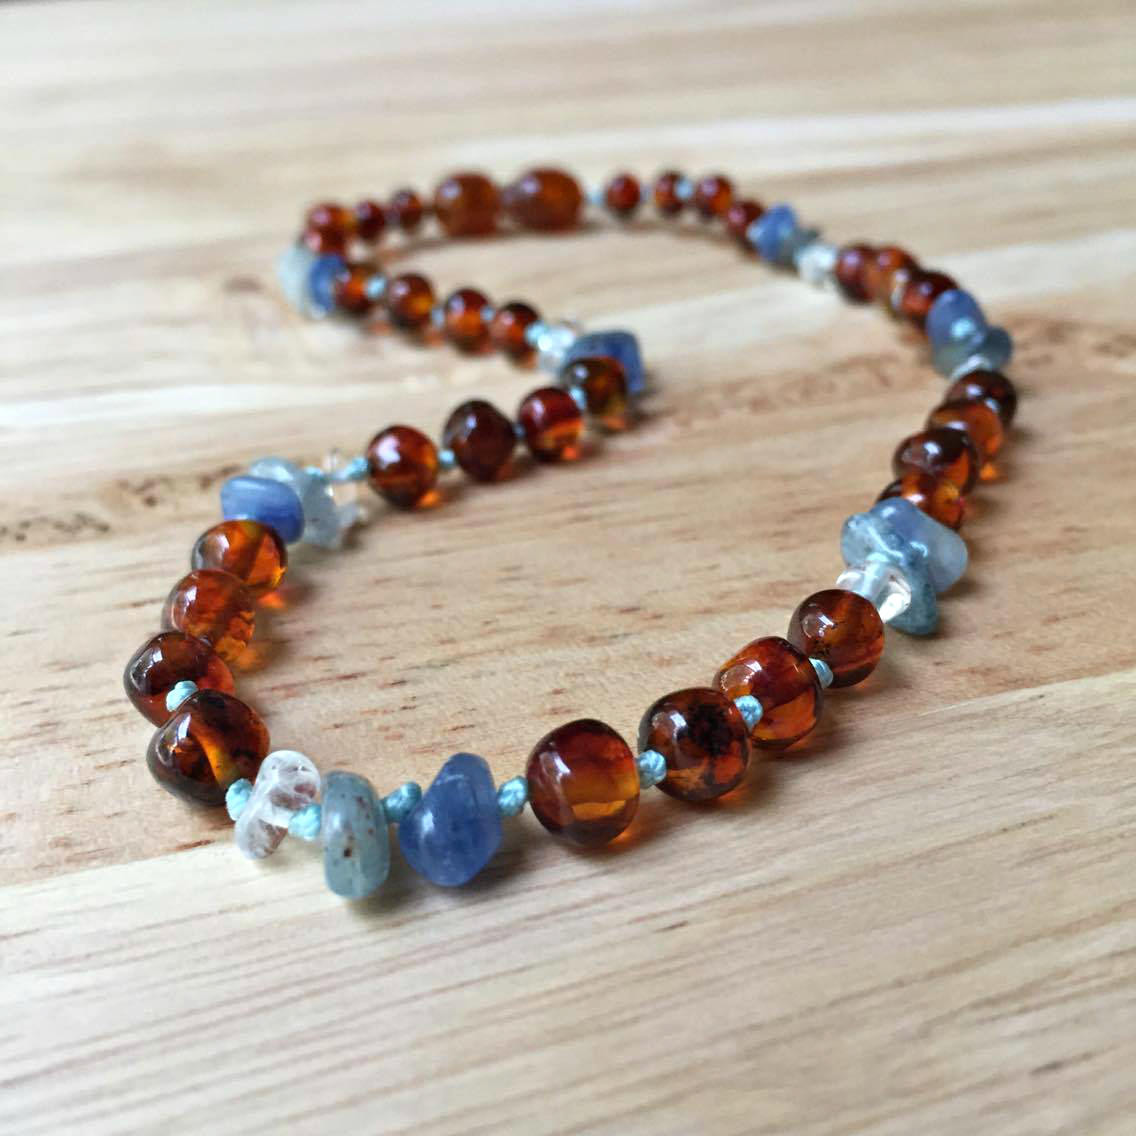 Amber Necklaces For Babies
 Boy s Amber Teething Necklace amber necklace baby